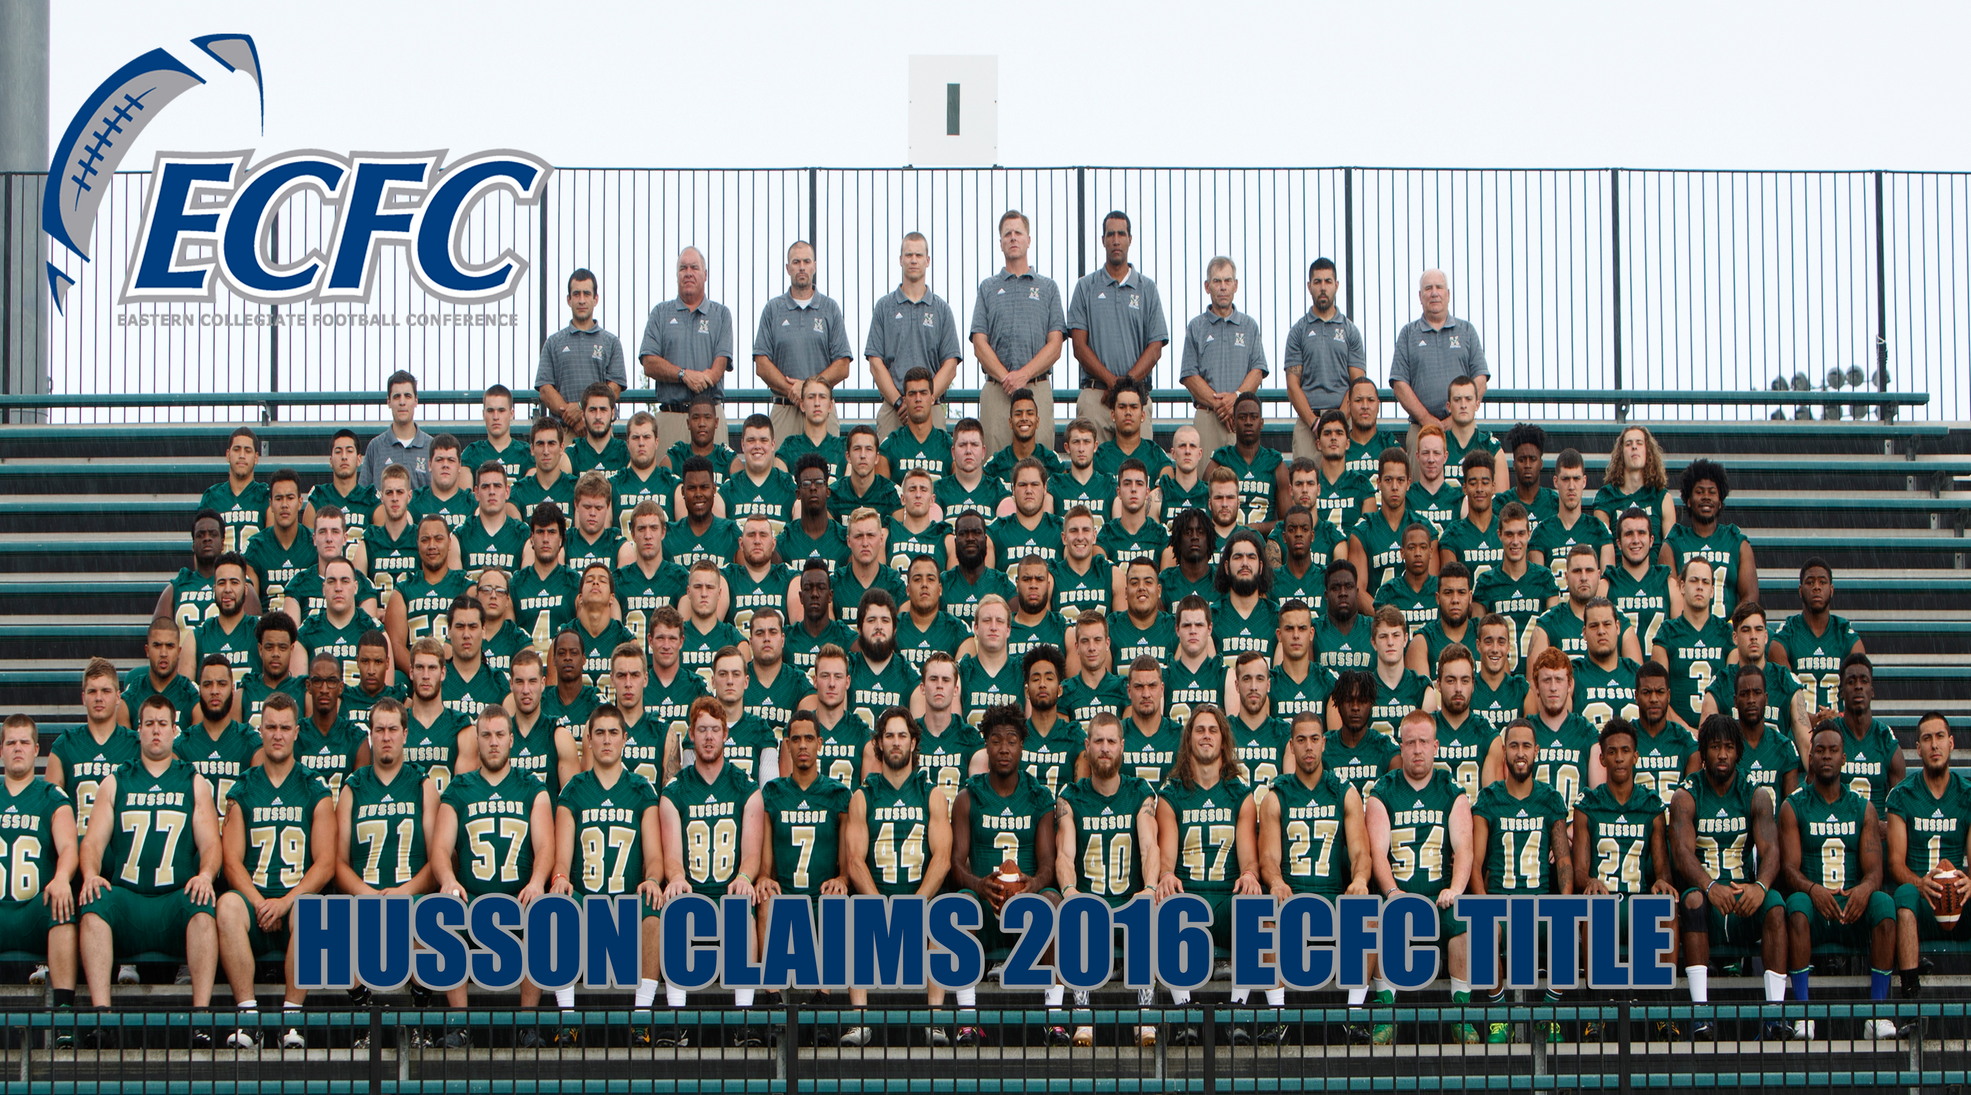 Husson Claims 2016 ECFC Title